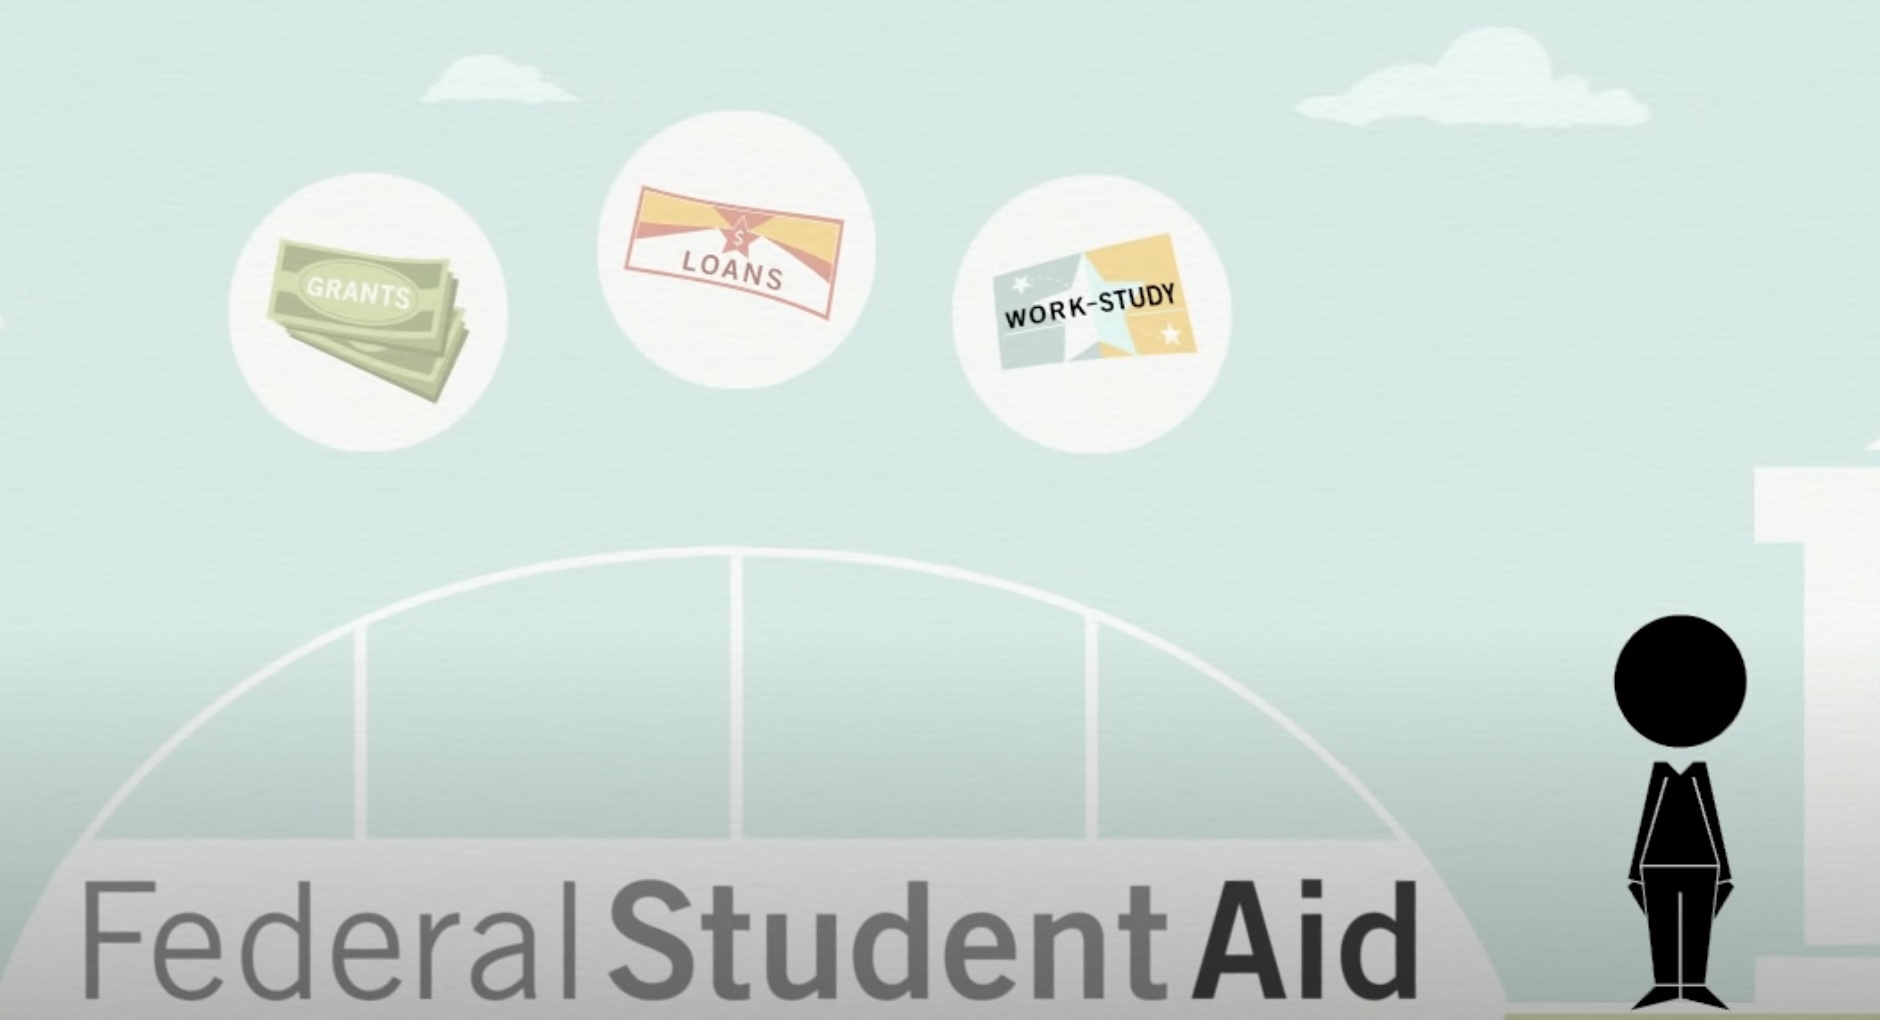 Types of Federal Student Aid